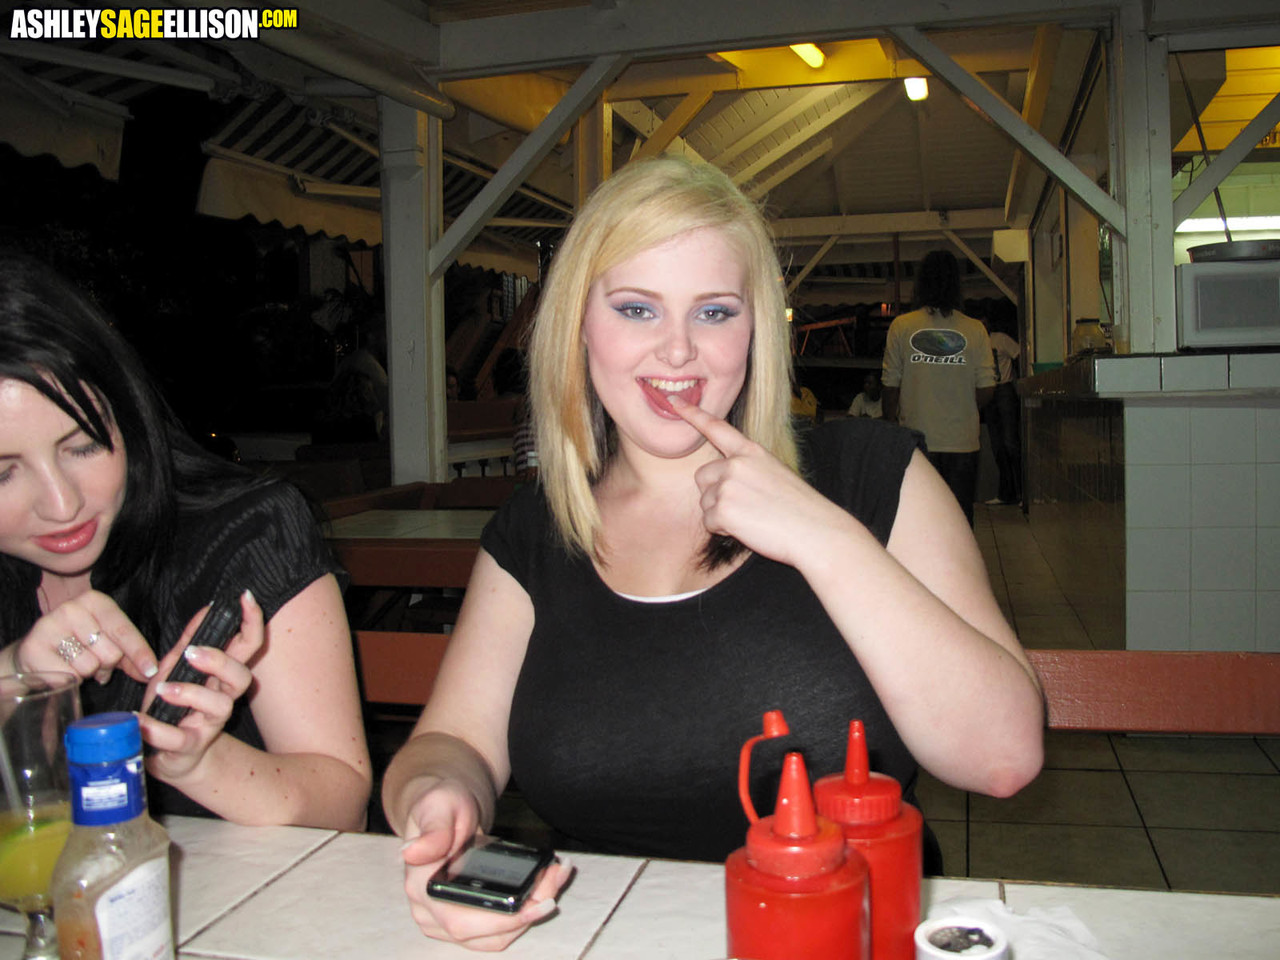 Fat chick Ashley Sage Ellison and her busty gf go out on the town porno foto #426376435 | Ashley Sage Ellison Pics, Ashley Sage Ellison, Karina Hart, BBW, mobiele porno